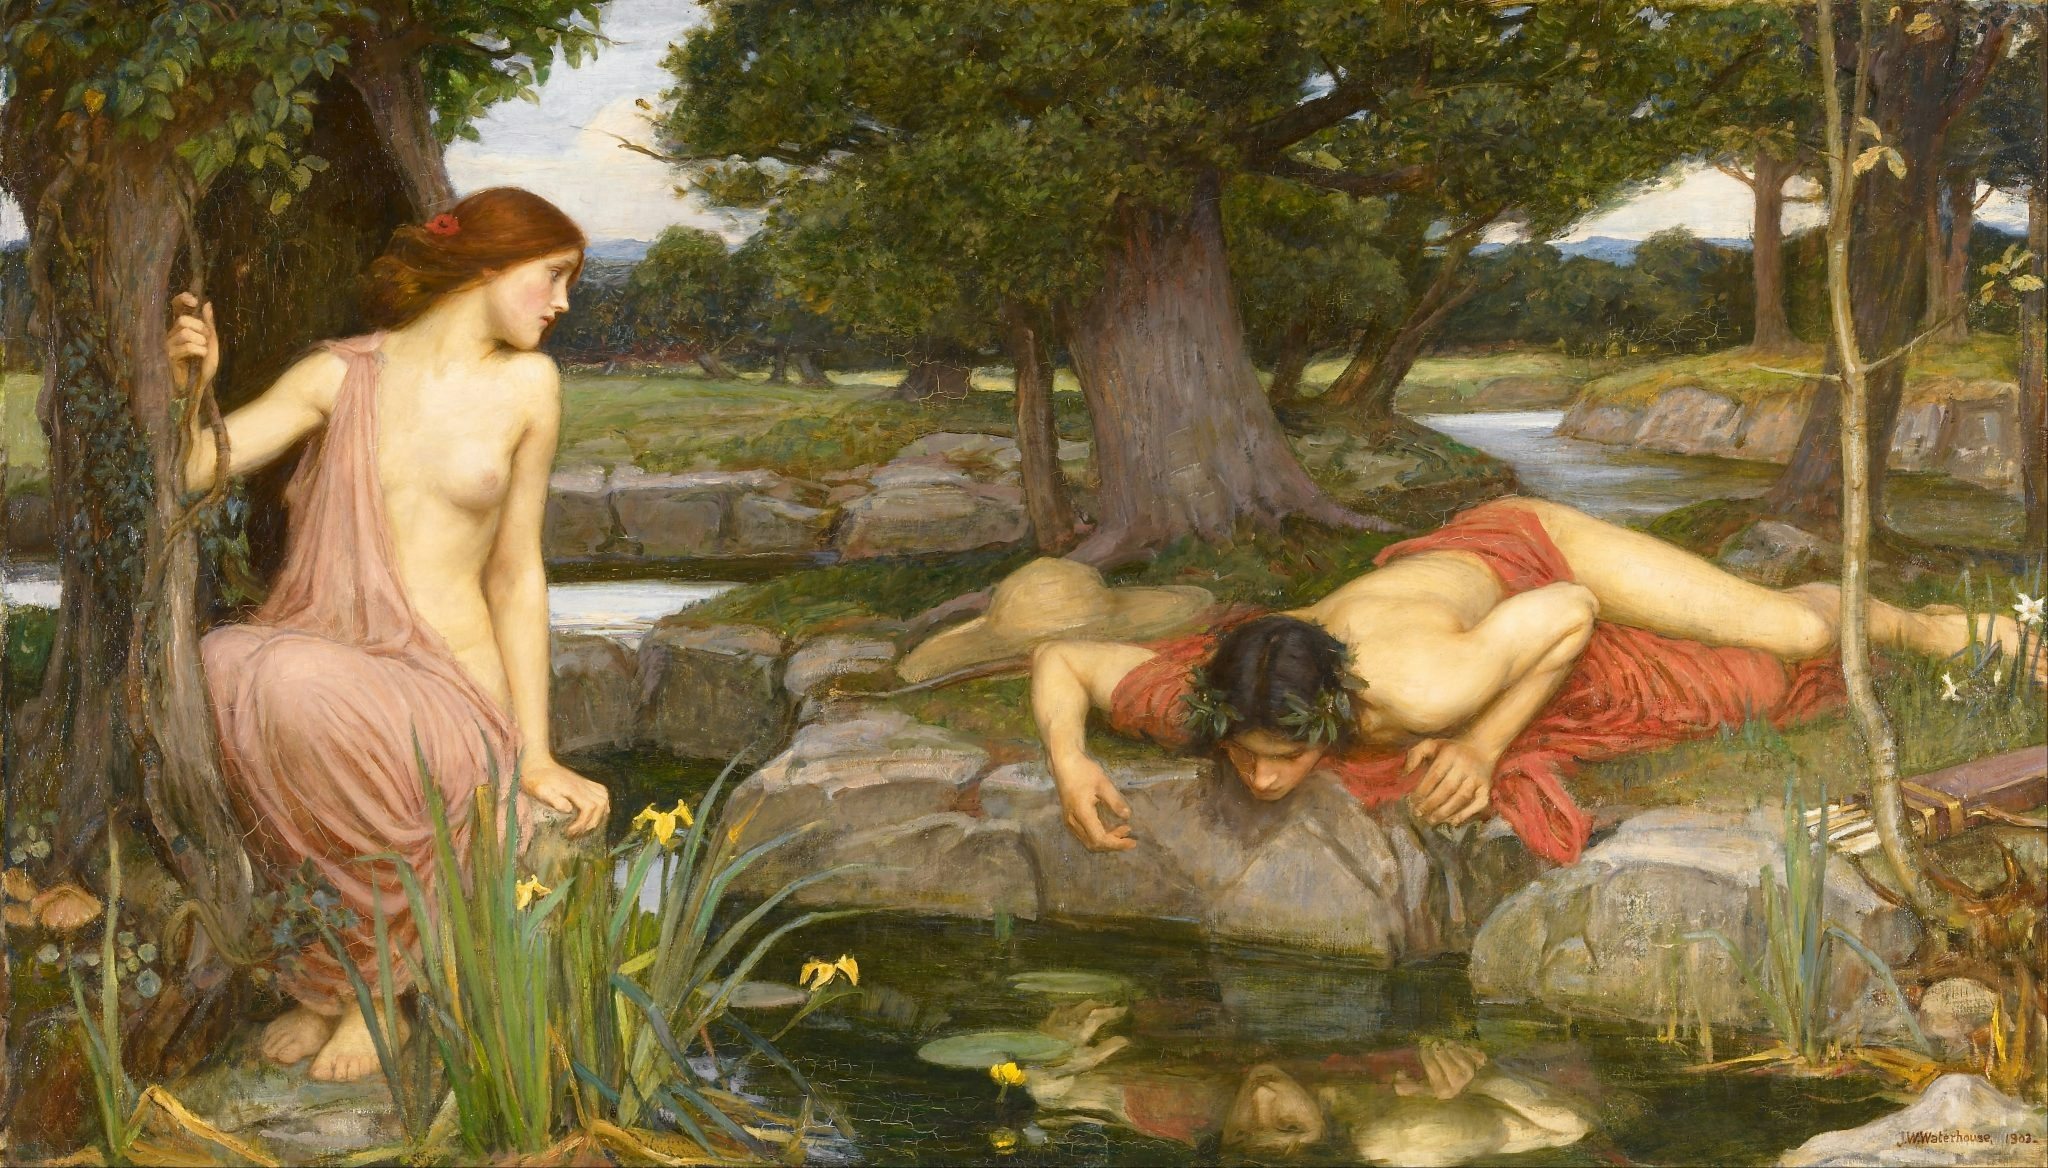 "Echo and Narcissus" by John William Waterhous. Photo: Public Domain